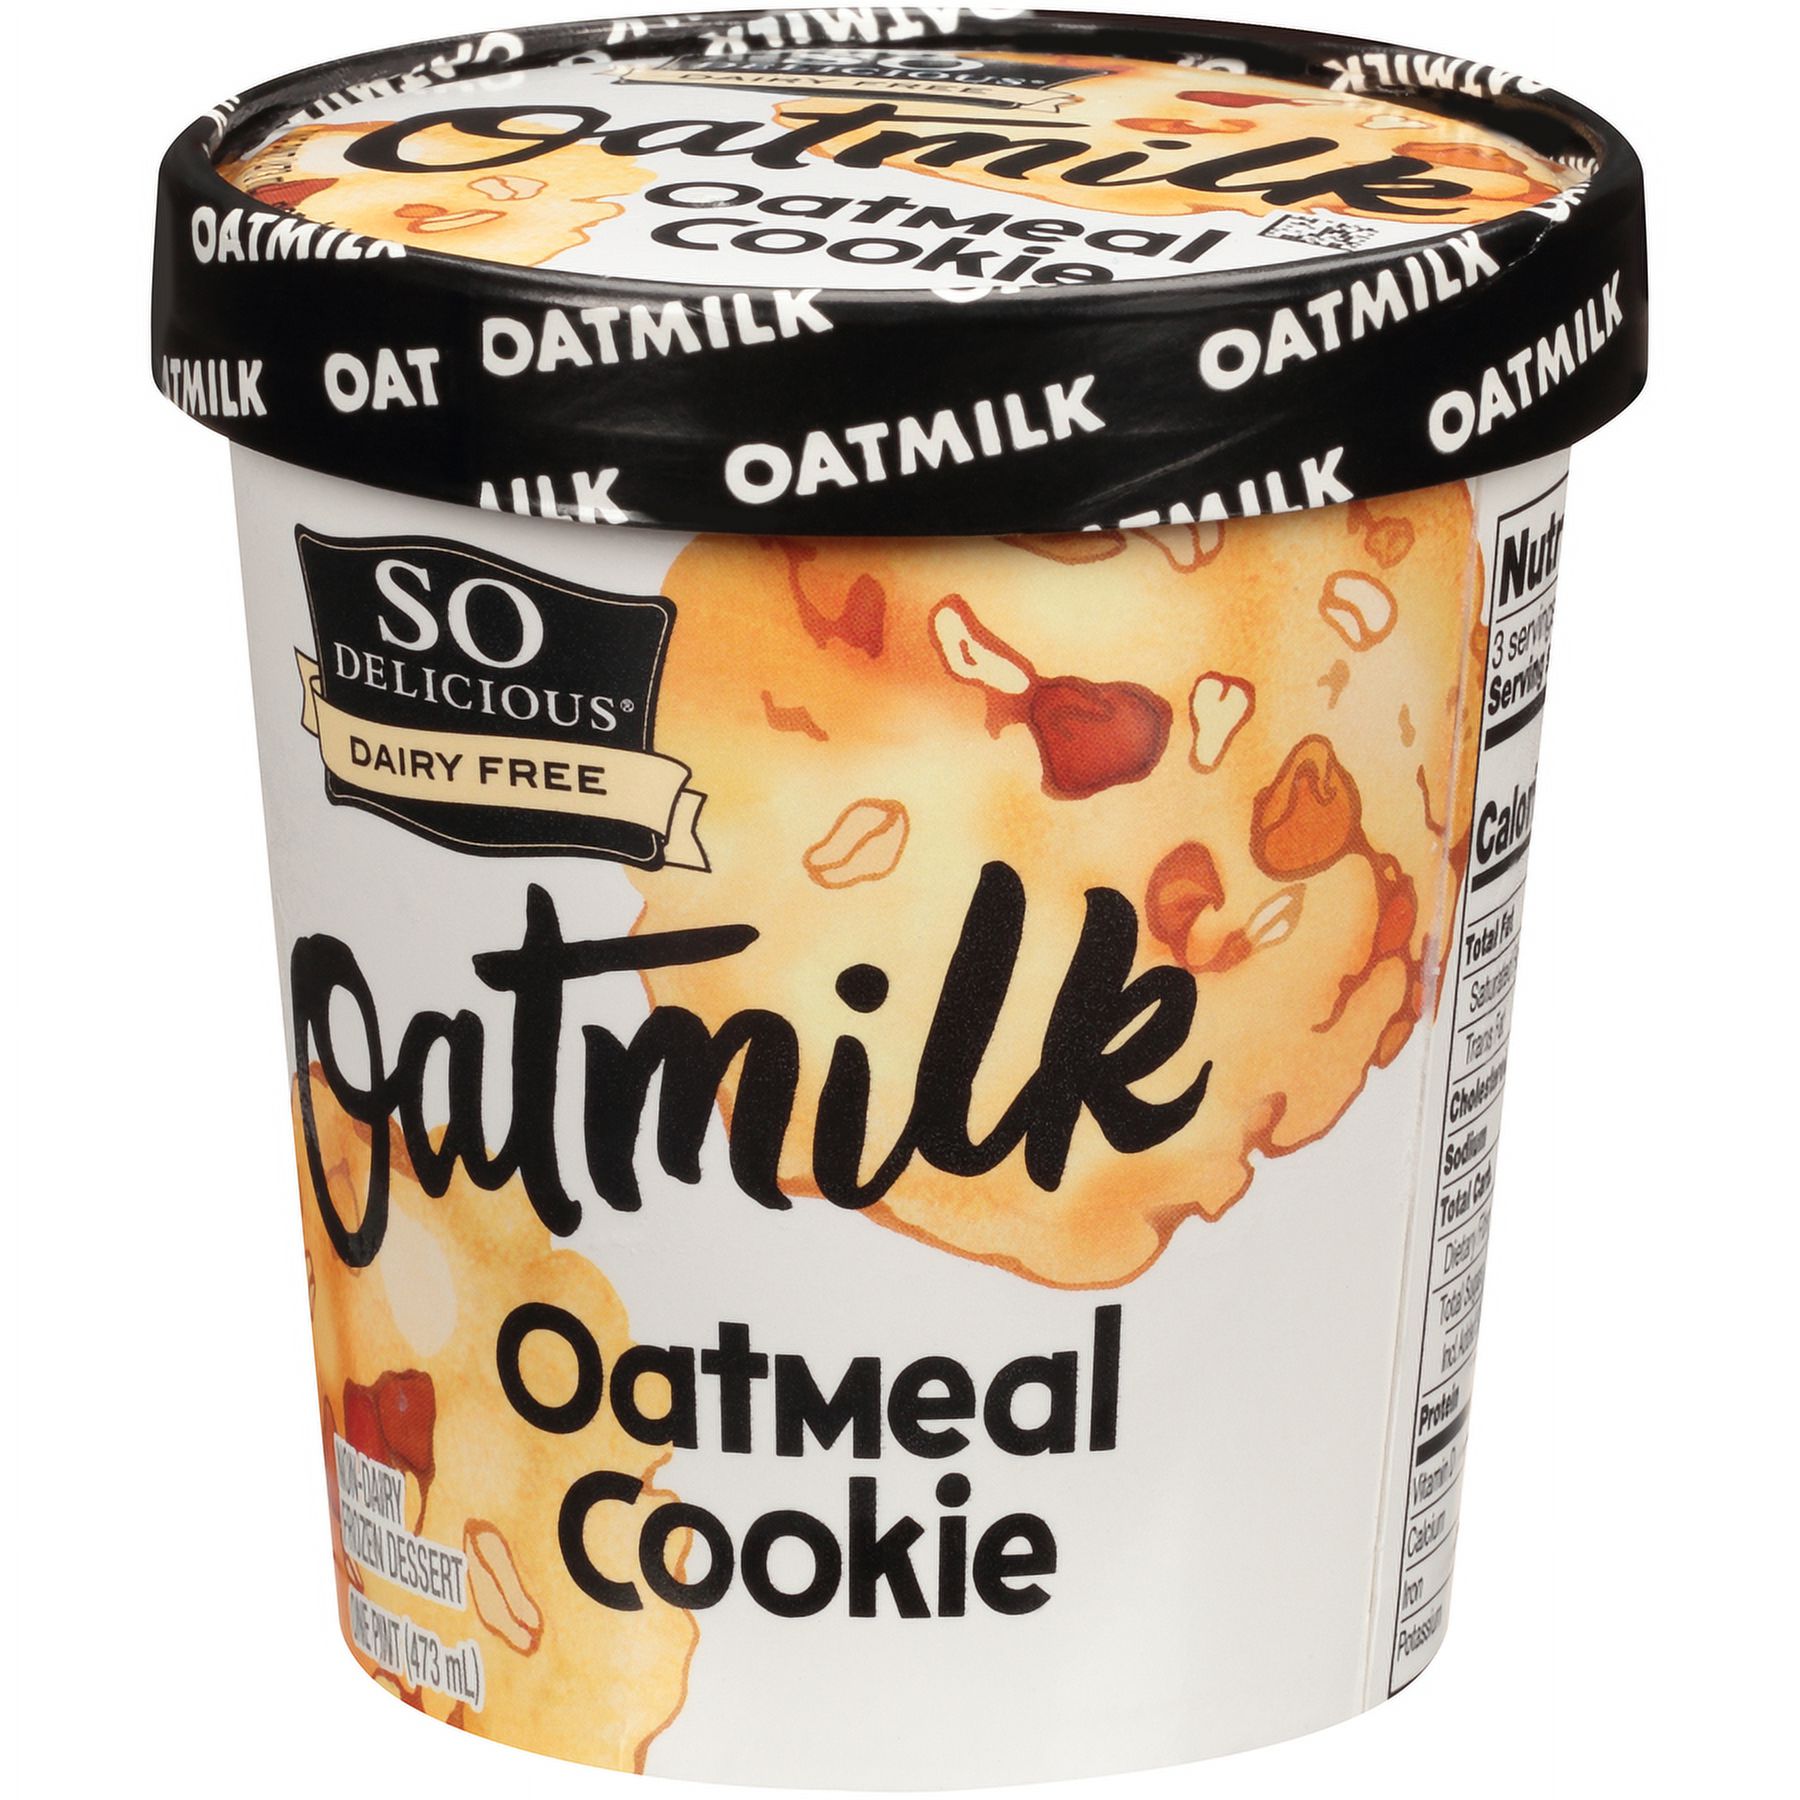 So Delicious® Dairy Free Oatmilk Oatmeal Cookie Non-Dairy Frozen Dessert 1 pt. Tub - image 4 of 5